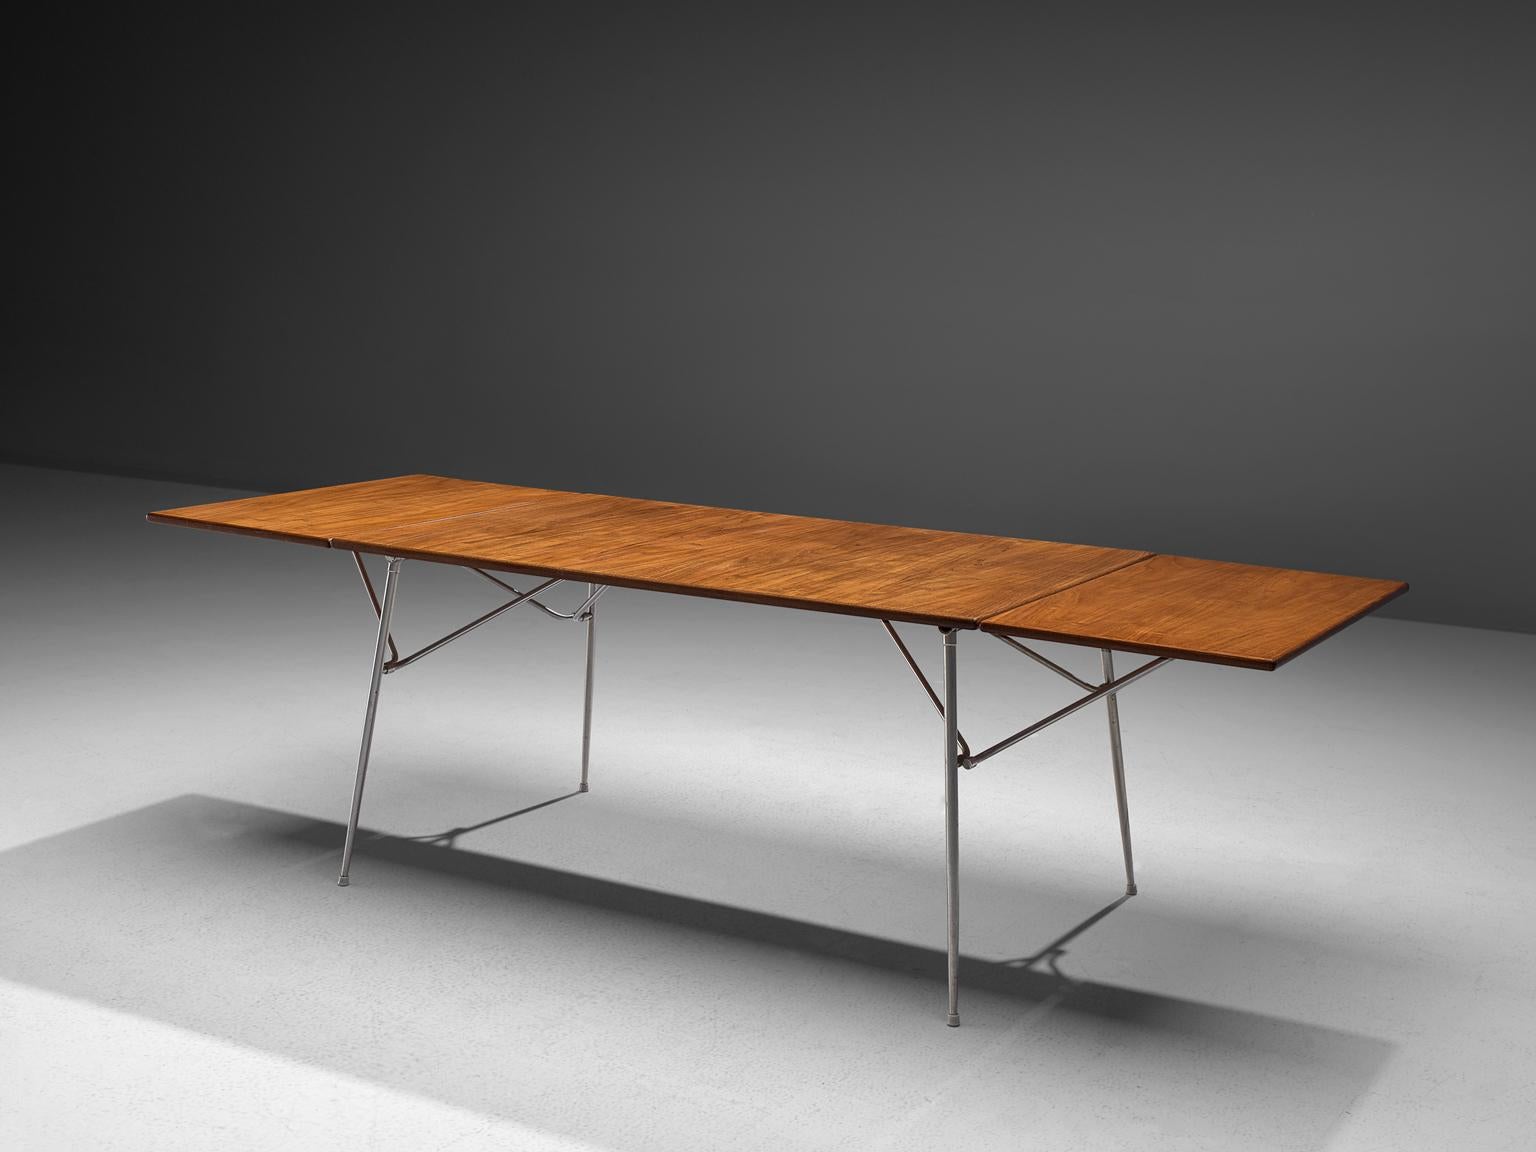 Børge Mogensen for Søborg Møbler, dining table or desk, teak and steel, Denmark, 1953.

Drop leaf teak dining table by Børge Mogensen for Søborg Møbelfabrik. Rarely did Mogensen use steel as a featured material for his designs but with this